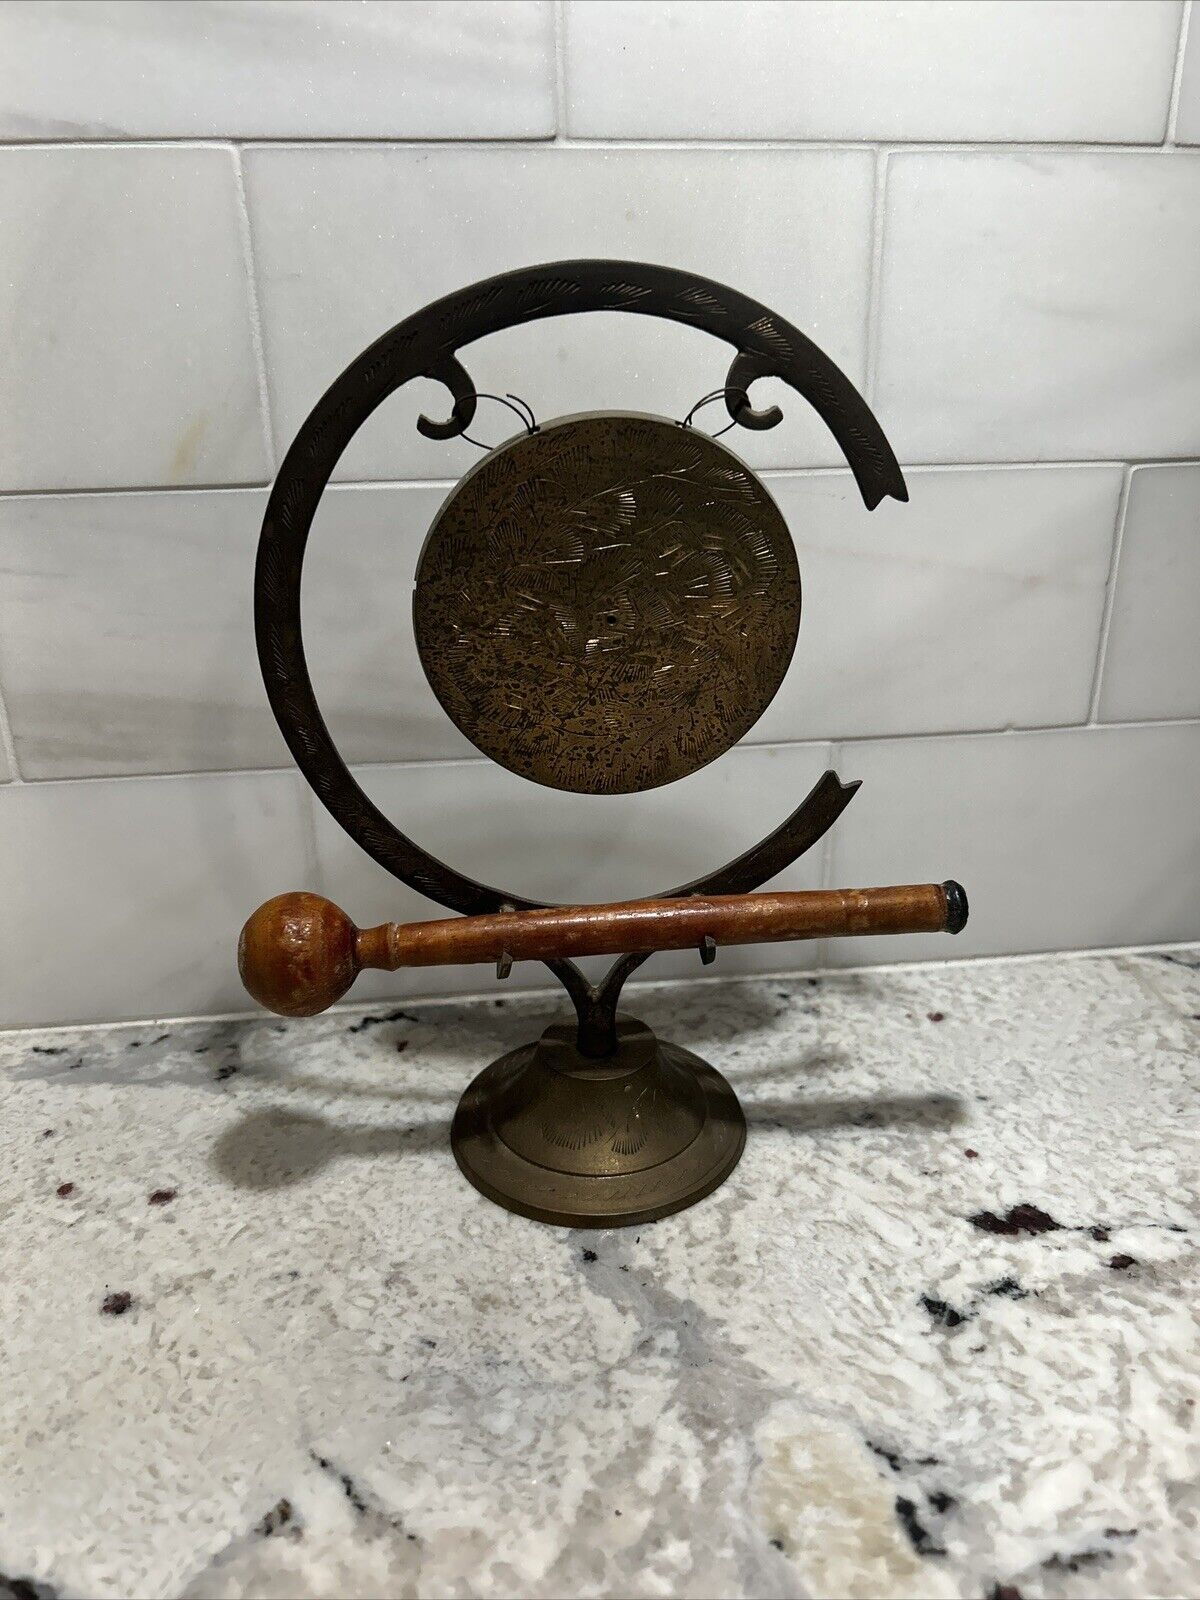 Vintage Brass Metal Handmade Decorative Etched Gong w/Wooden Mallet - India